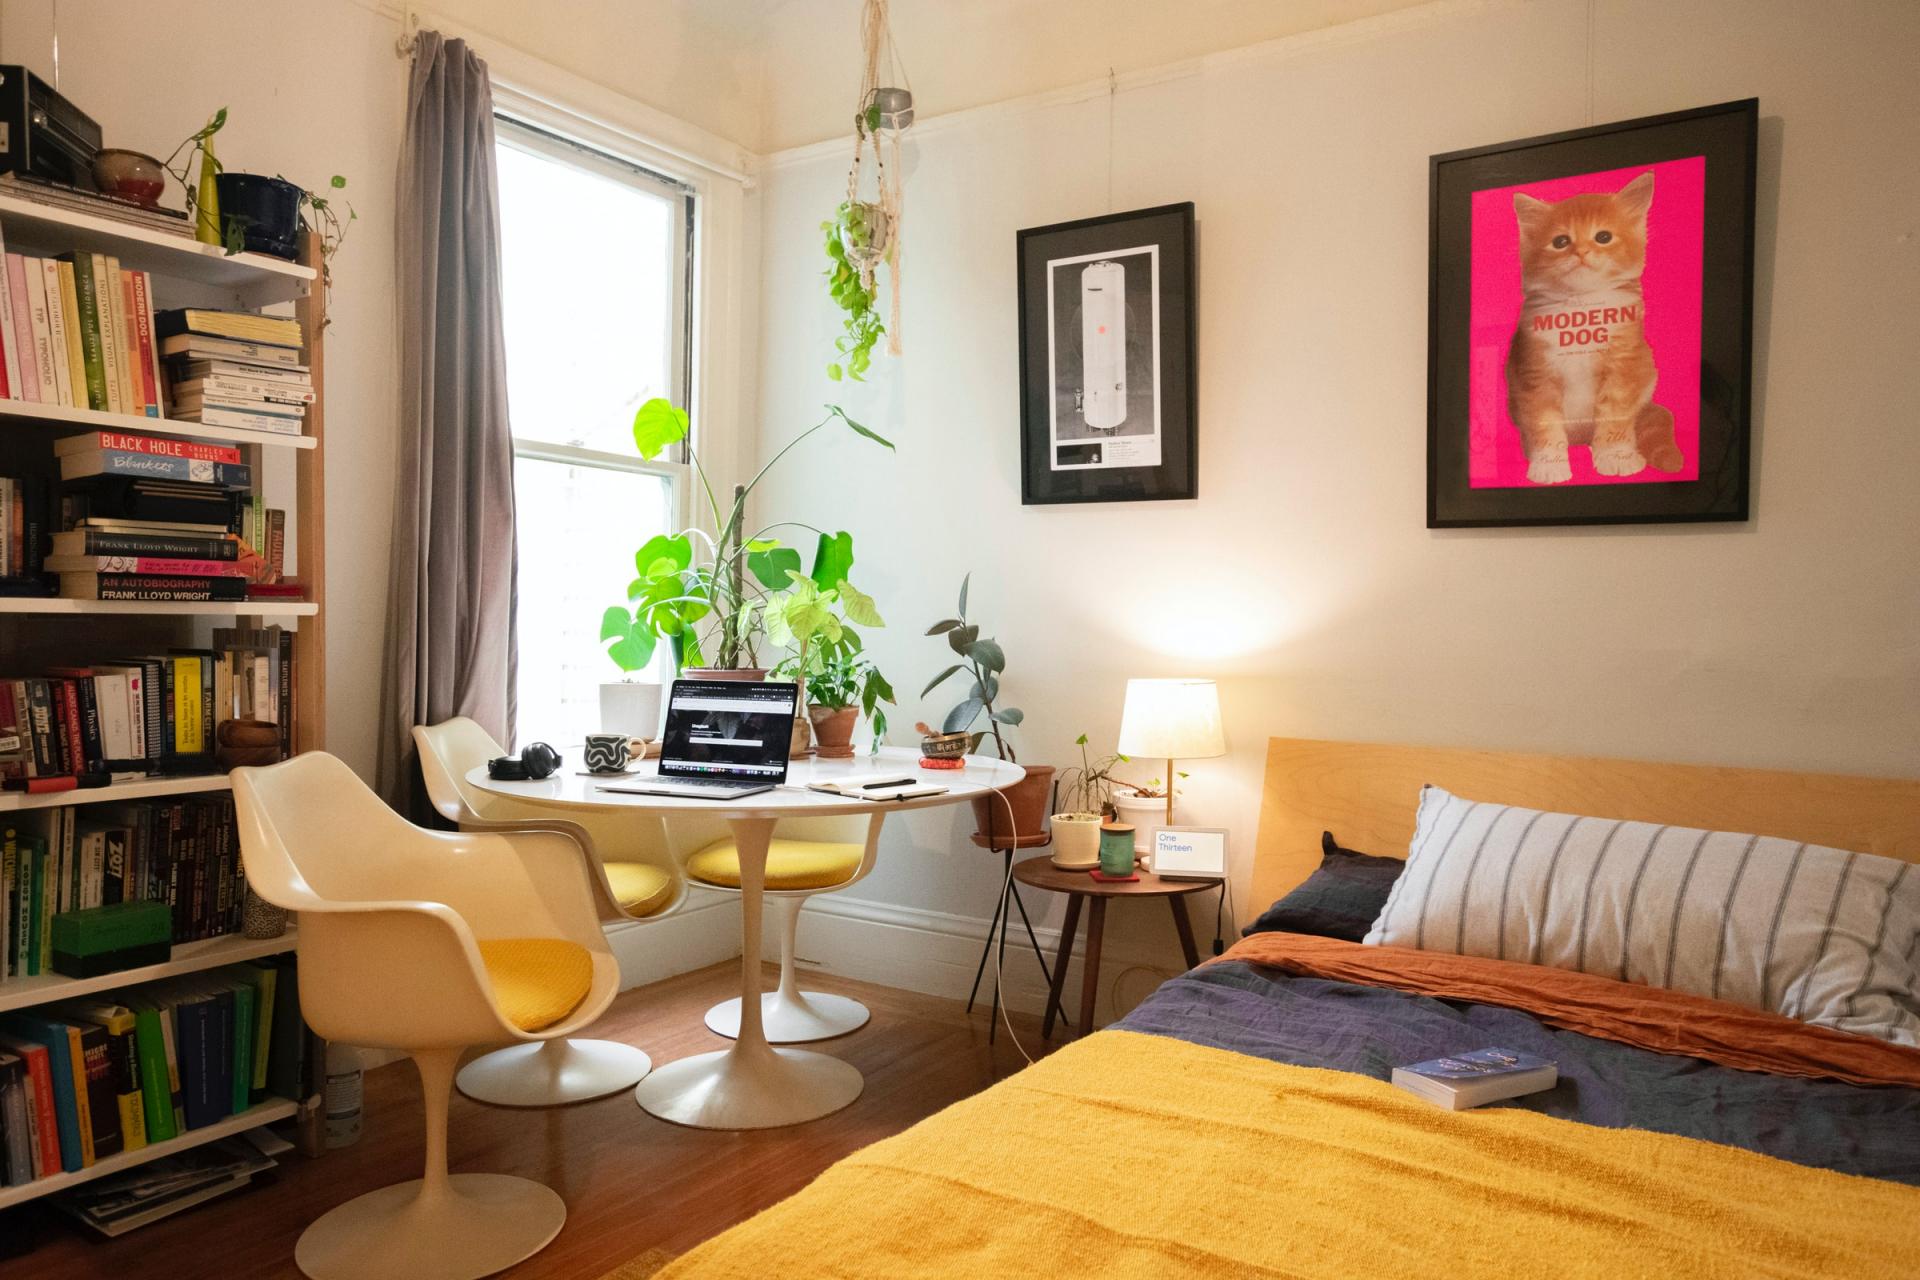 5 Tips for Styling Your Room for Online Video Meeting